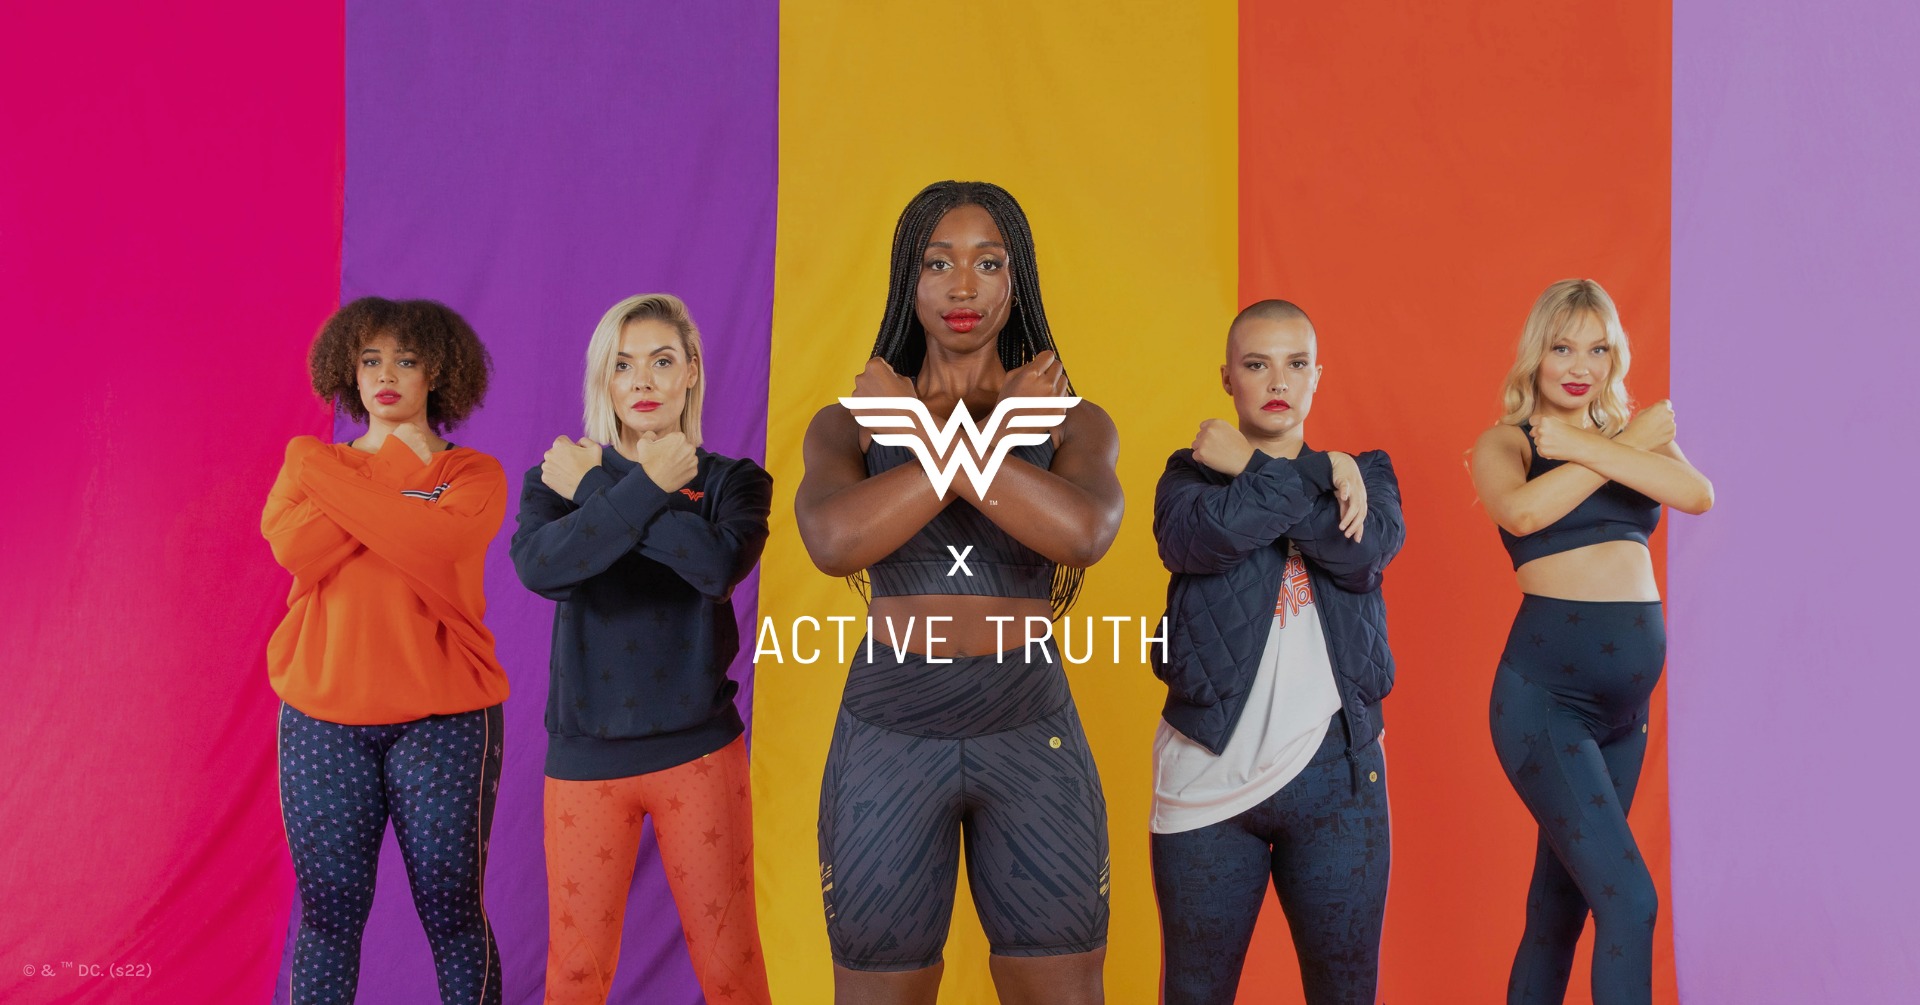 Shh, extra $30 OFF outlet styles with discount code at Active Truth[min. spend $100]